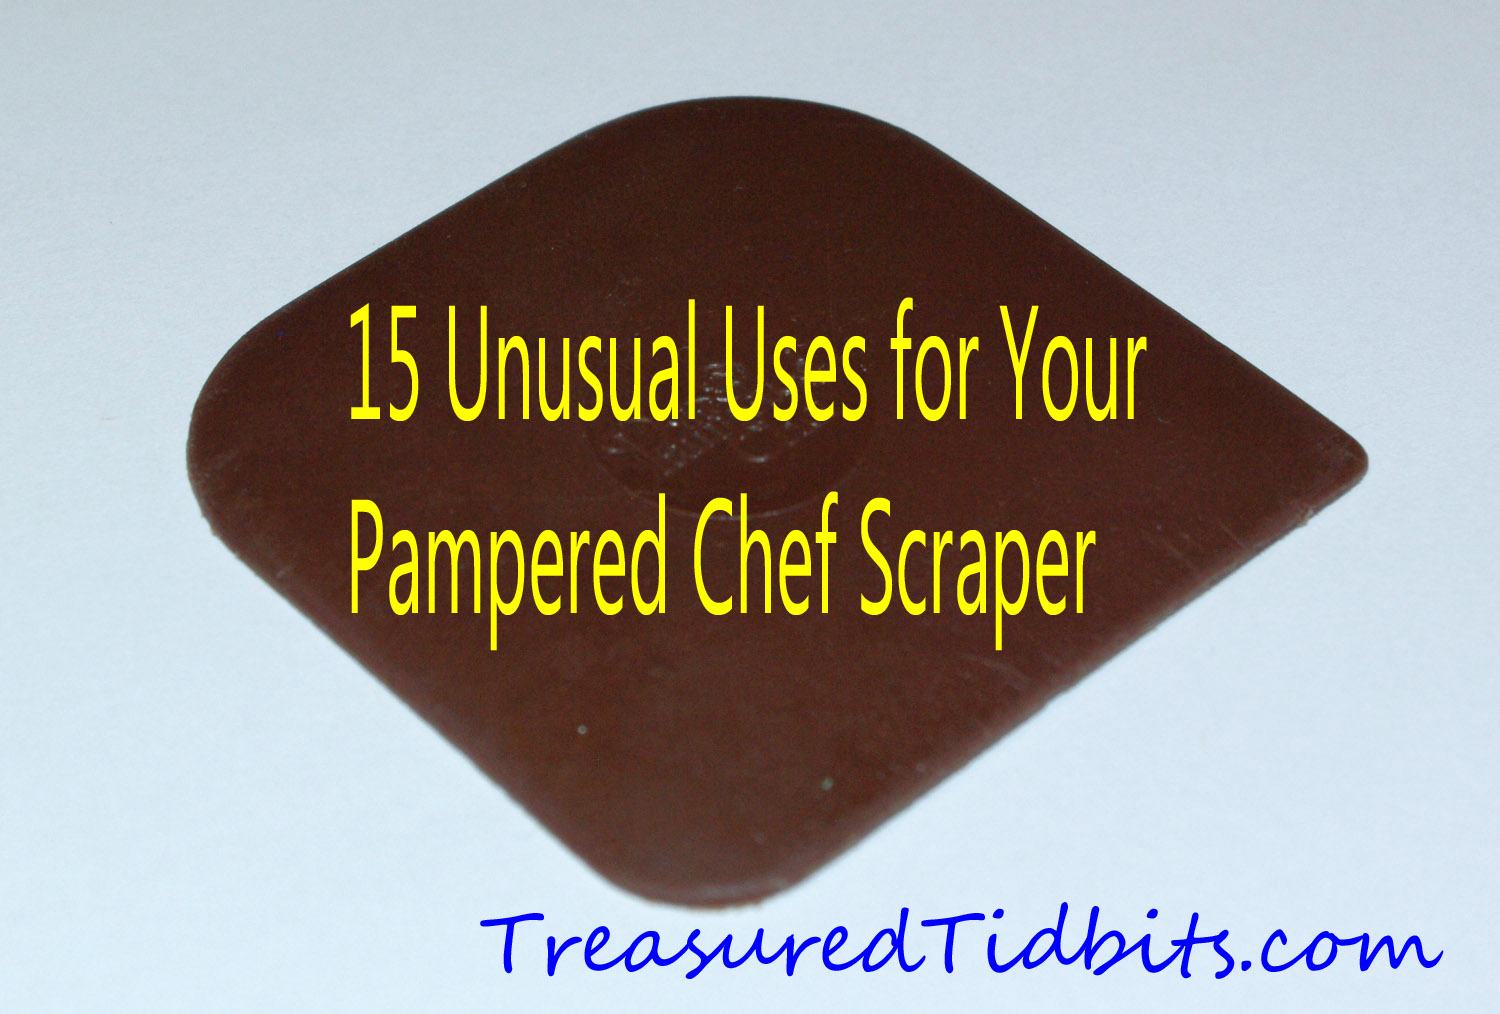 Treasured Tidbits by Tina » 15 Unusual Uses for a Pampered Chef